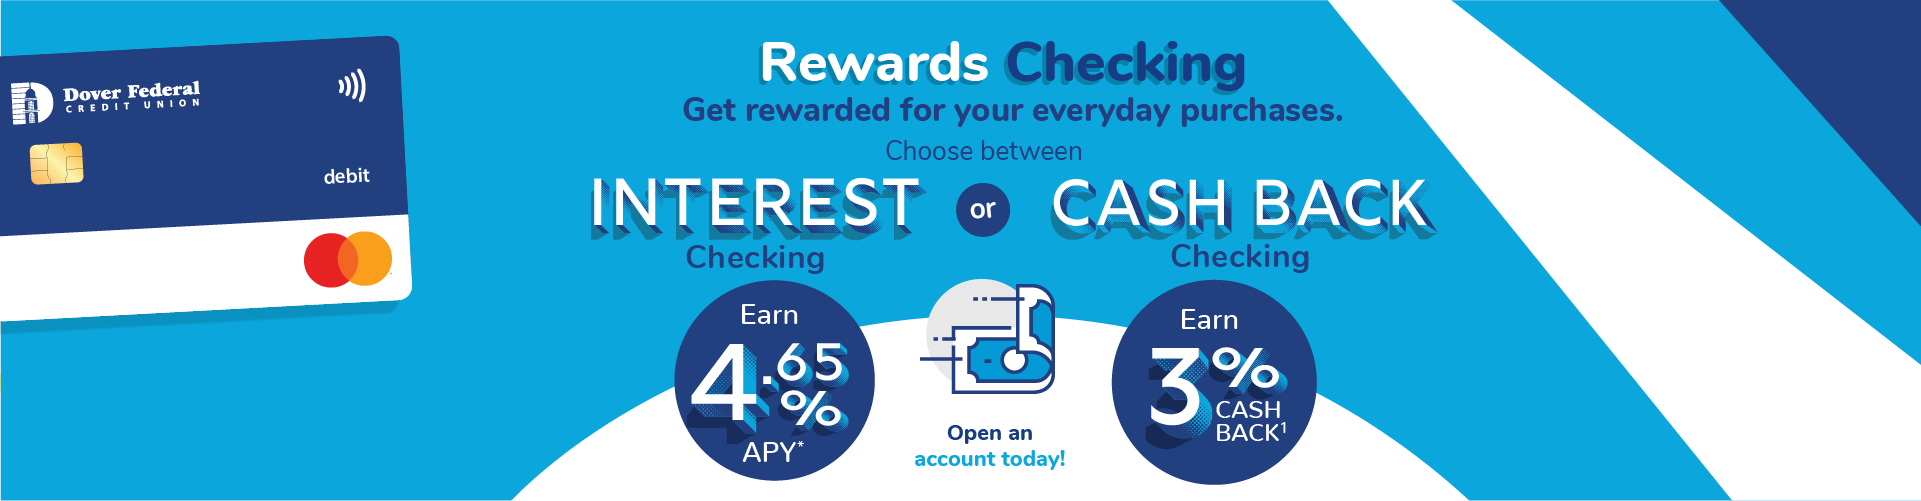 Rewards Checking featuring Interest Checking and Cash Back Checking